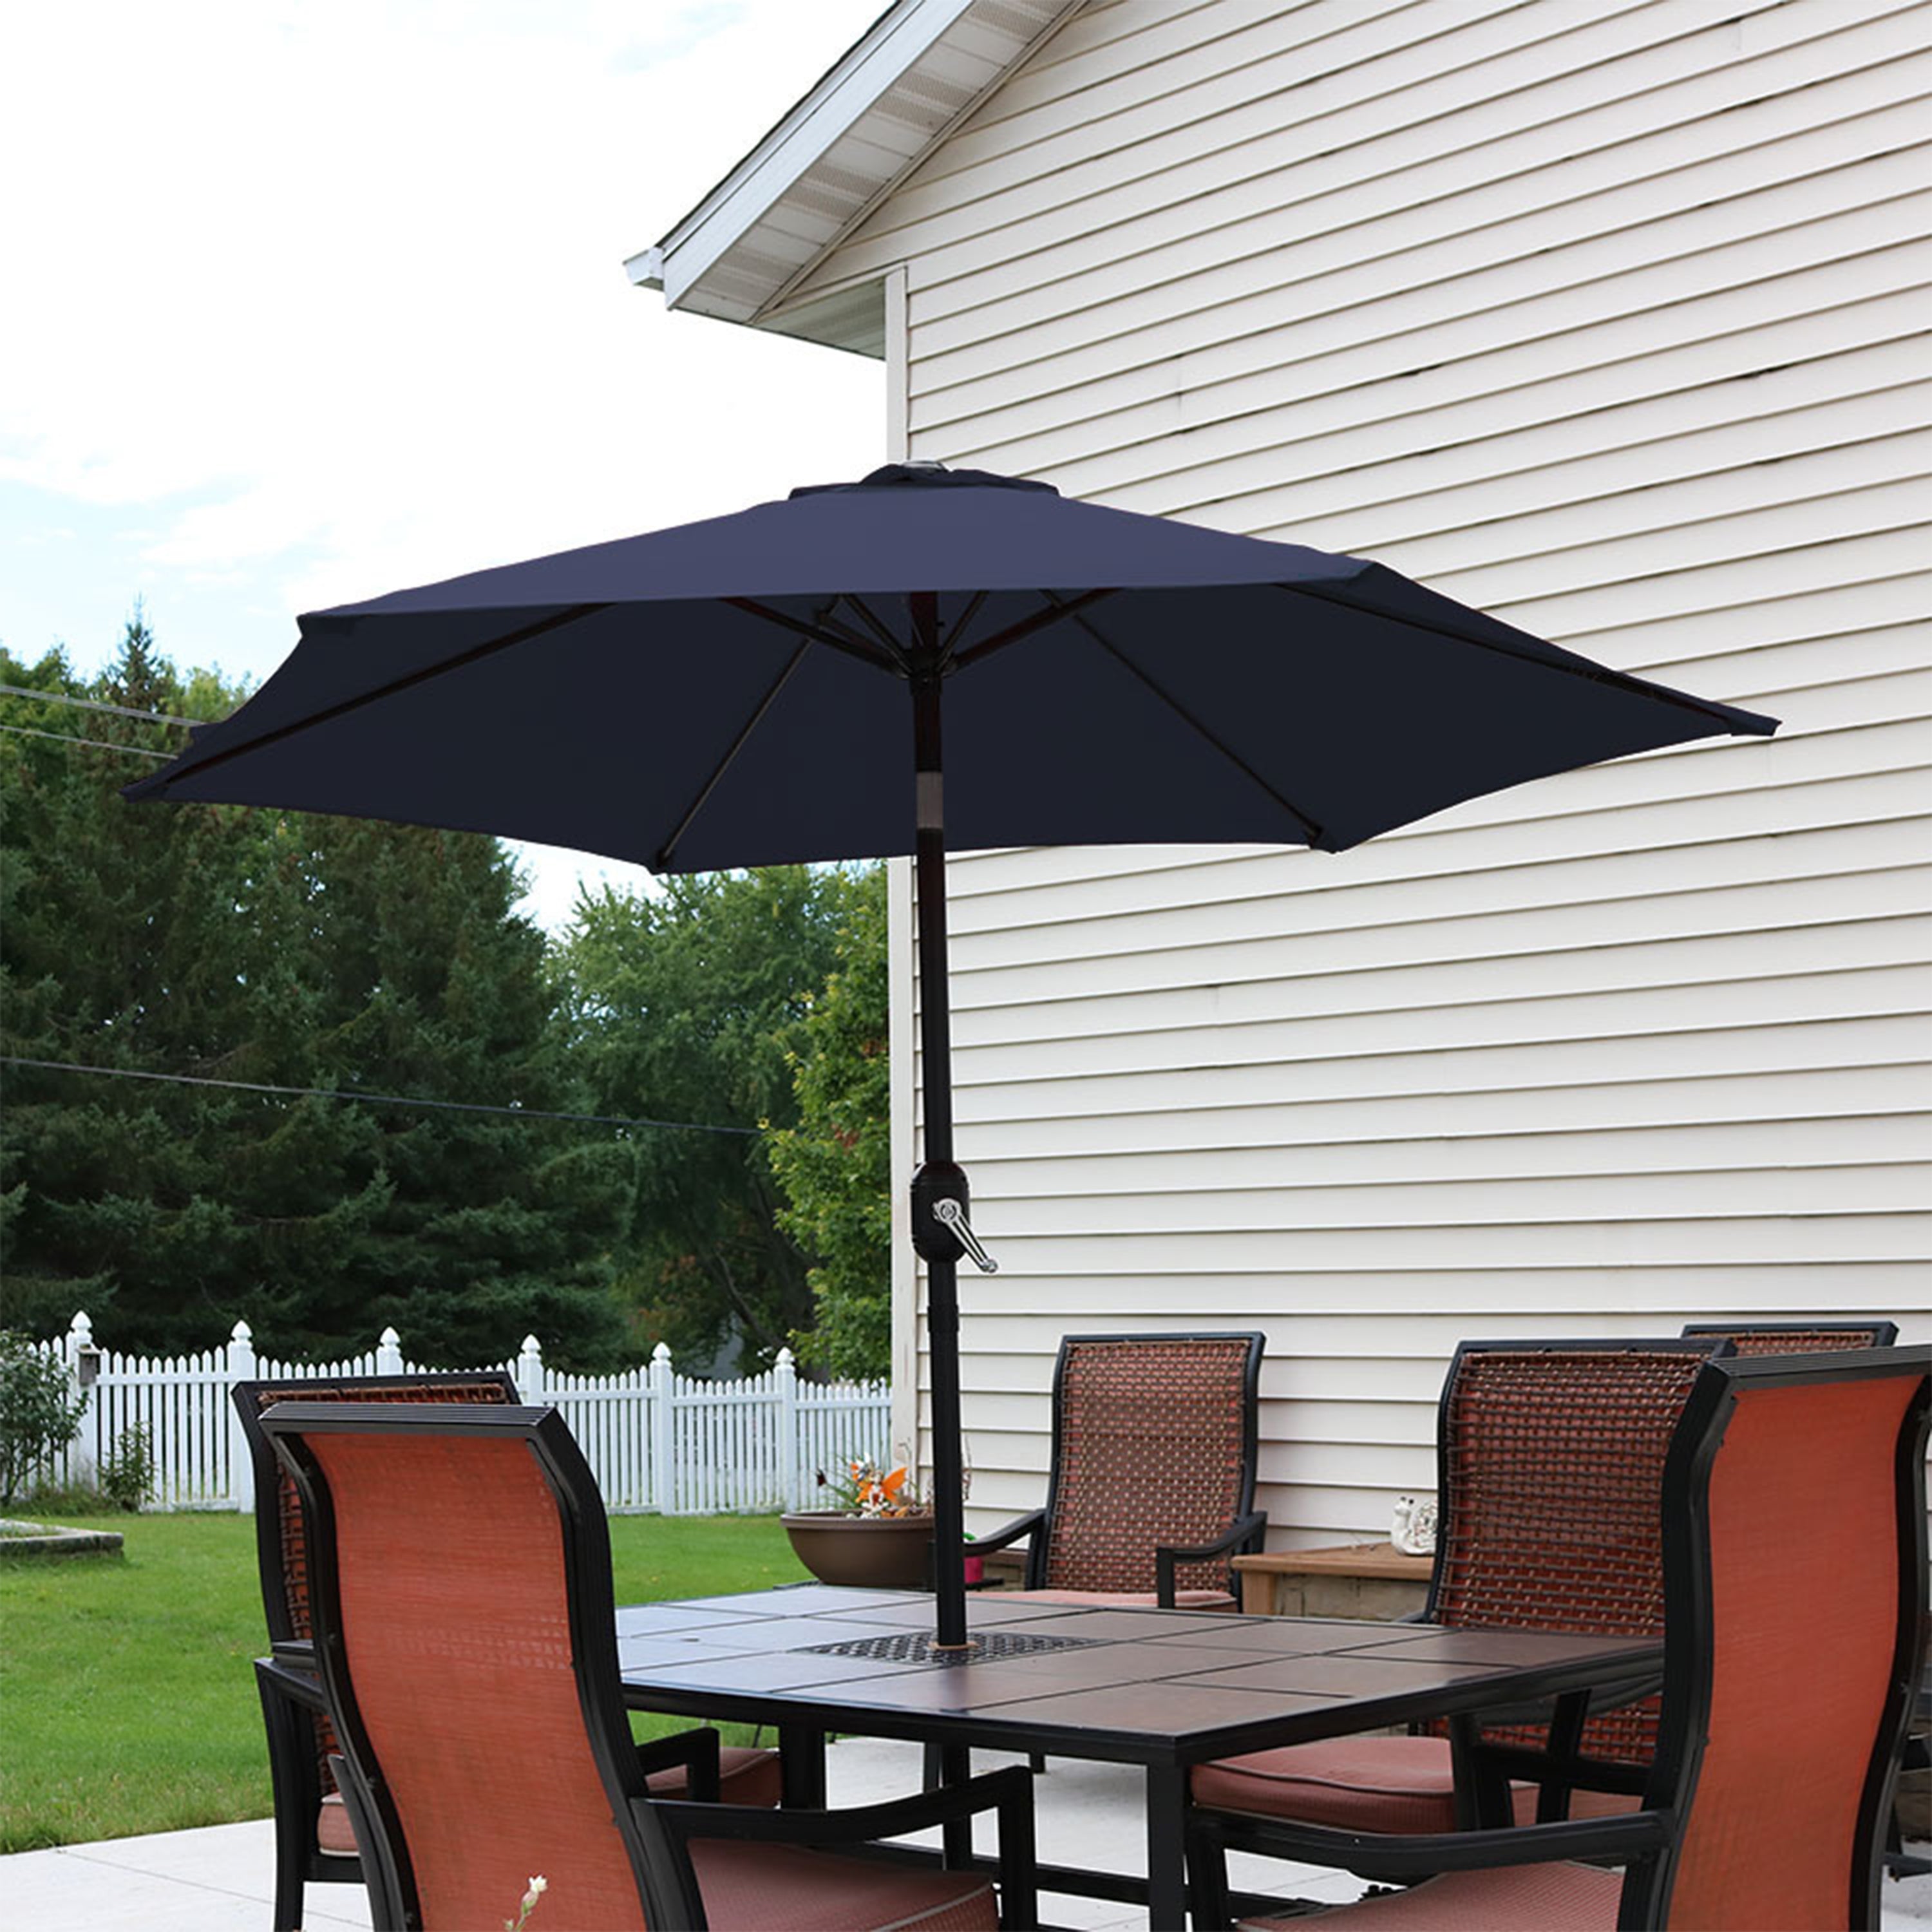 Sunnydaze Outdoor Aluminum Patio Table Umbrella with Polyester Canopy and Tilt and Crank Shade Control - 7.5' - Blue